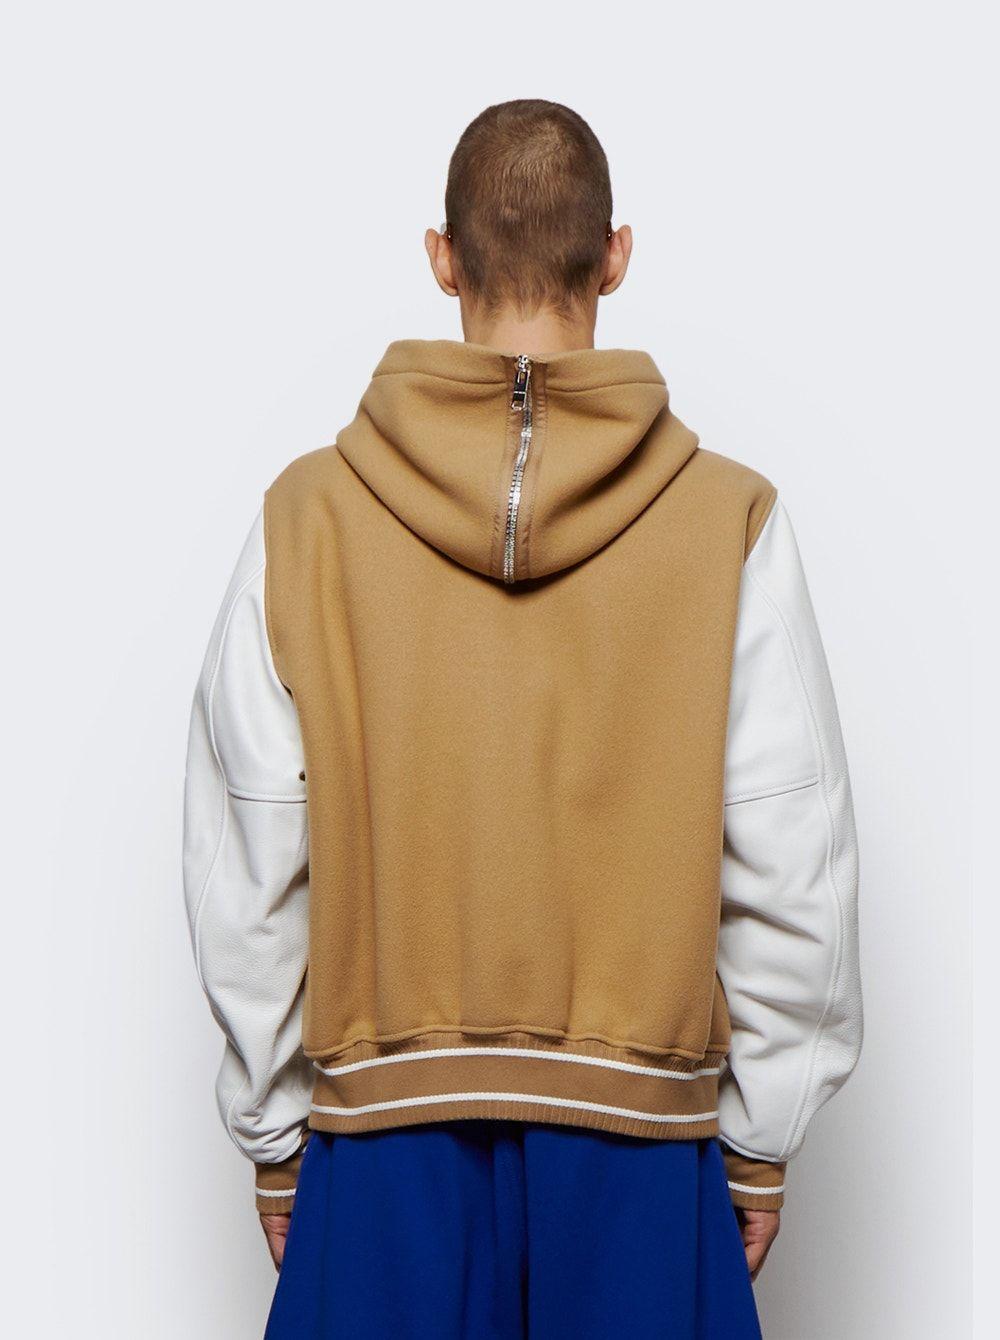 Givenchy Hooded Wool And Leather Big Varsity Jacket in Natural for